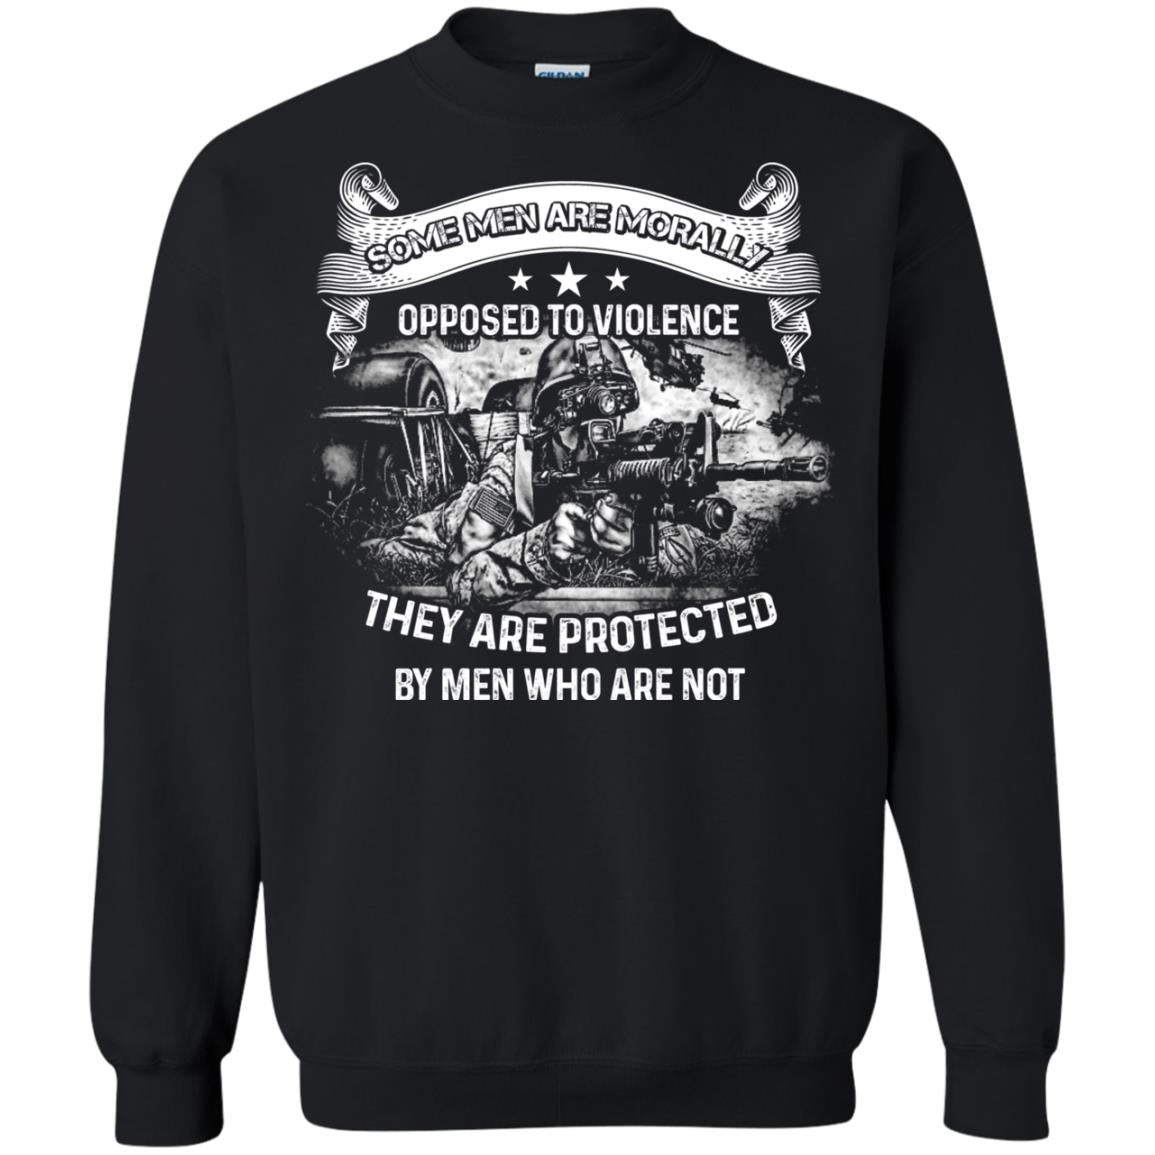 Some Men Are Morally Opposed To Violence They Are Protected By Men Who Are NotG180 Gildan Crewneck Pullover Sweatshirt 8 oz.